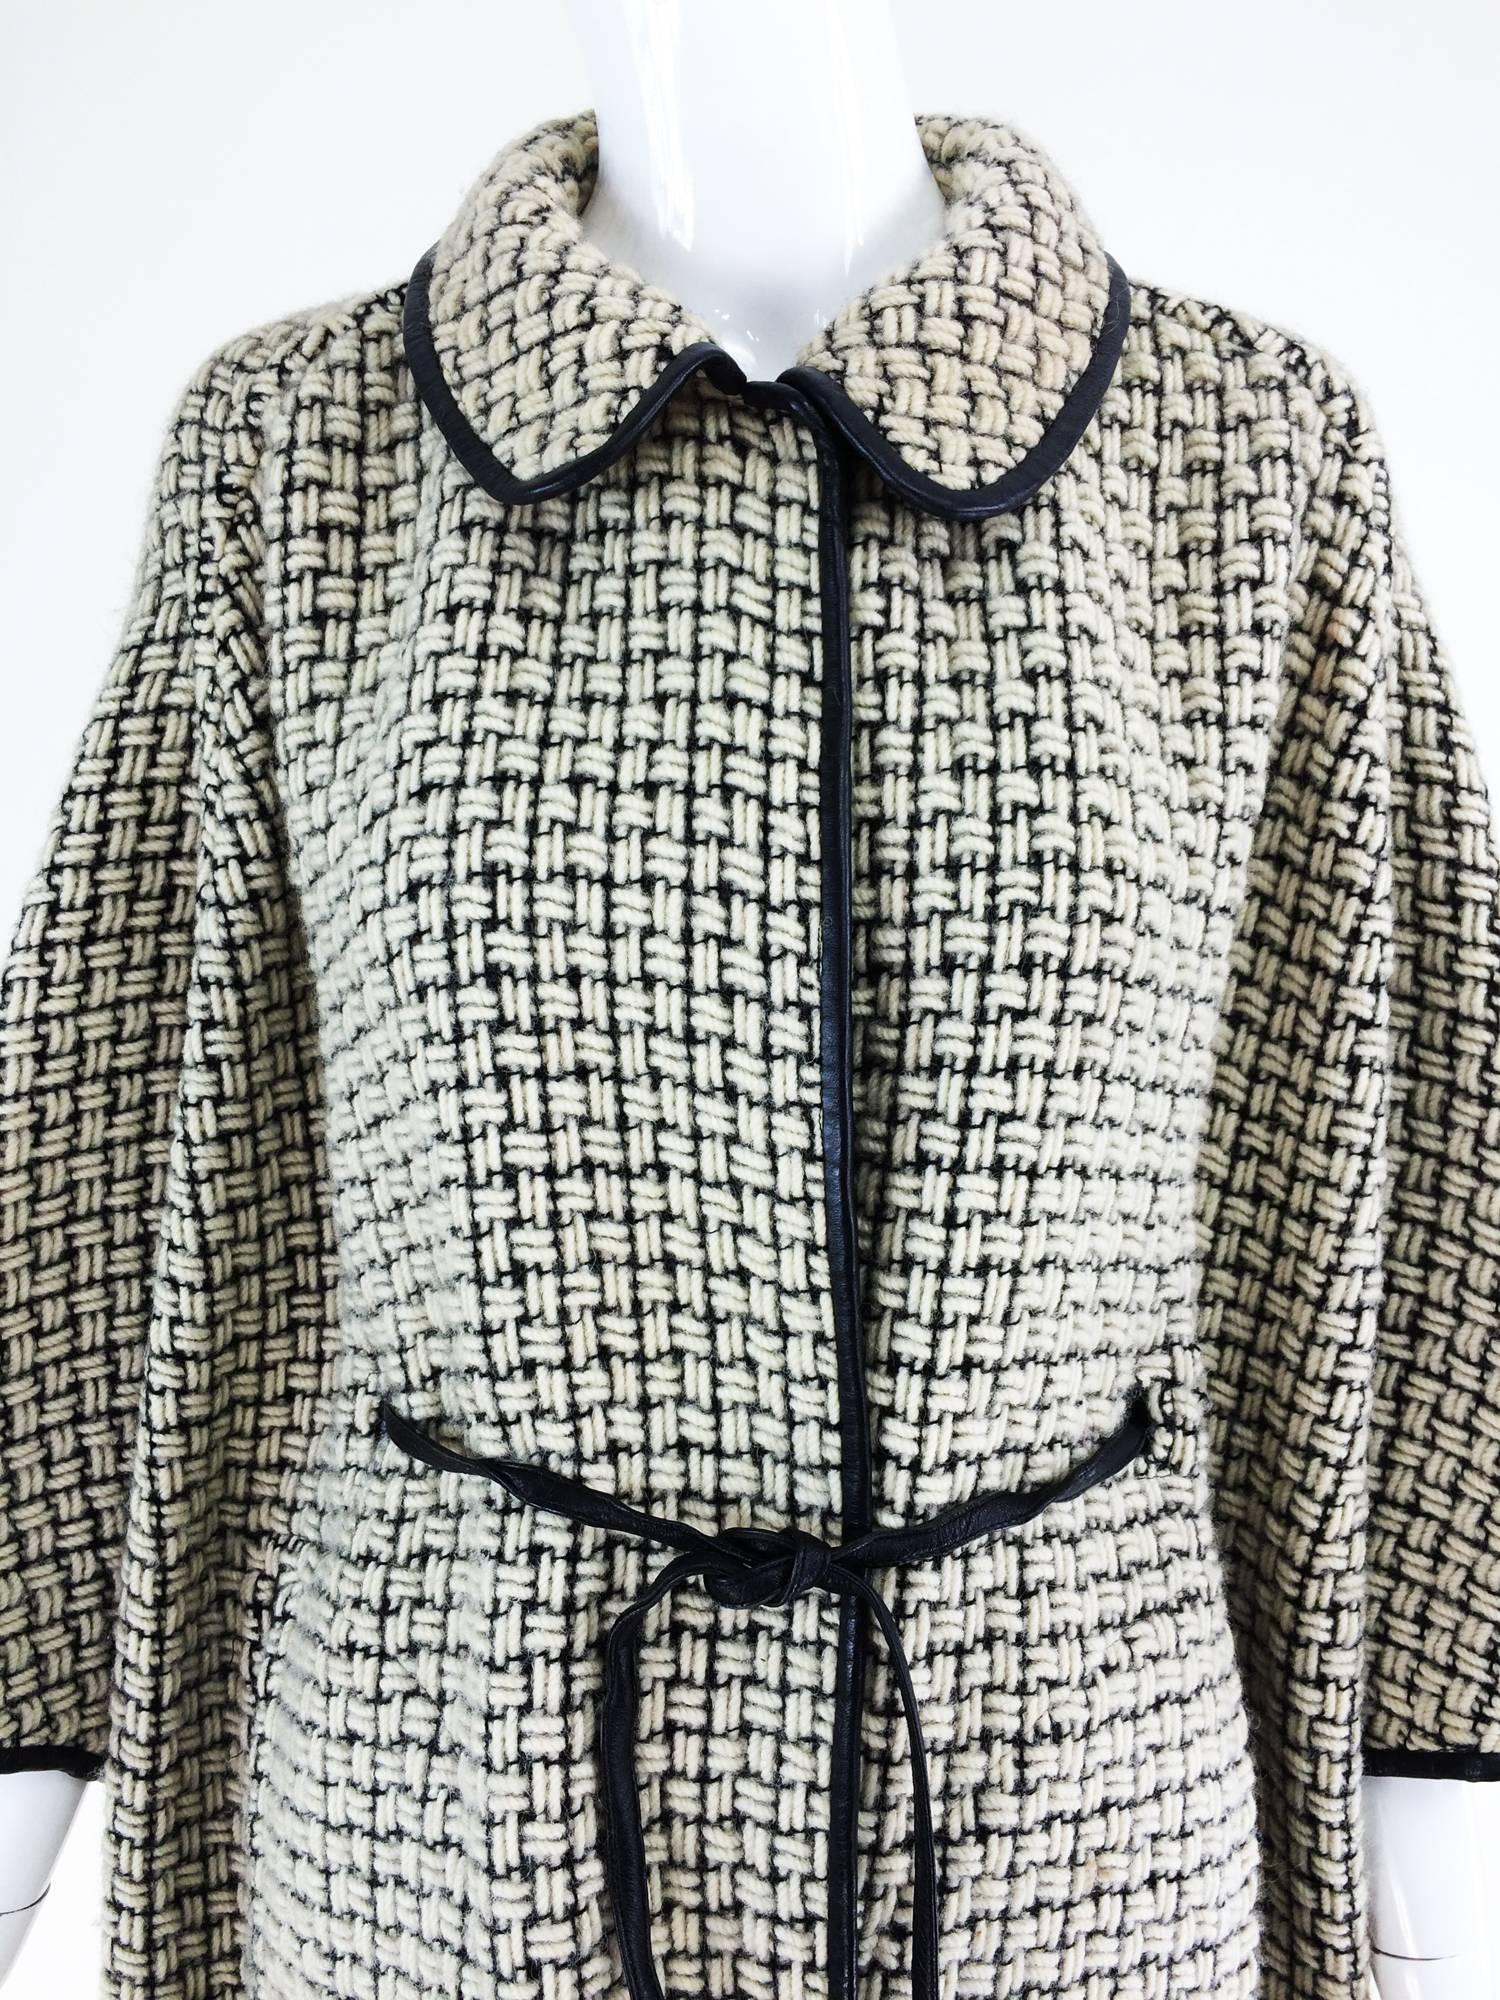 Bonnie Cashin black & white woven wool sac back coat 1950s...Casual and very stylish coat in an interesting box style weave of thick ivory wool yarn and heavy back thread...The coat is unstructured, with bat wing sleeves (although the back of the